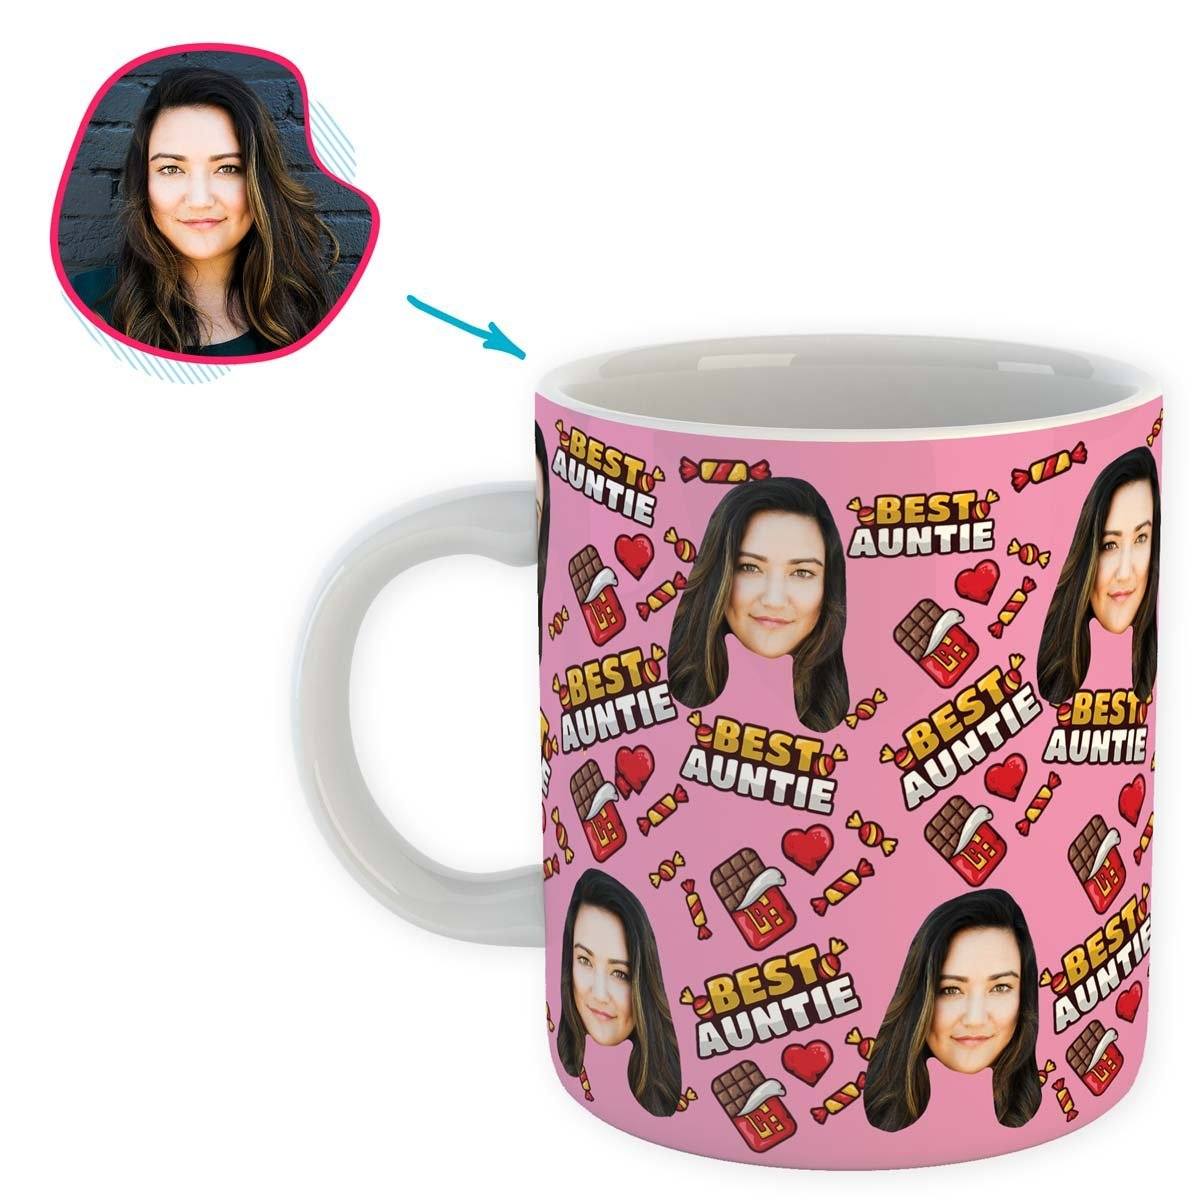 Pink Auntie personalized mug with photo of face printed on it